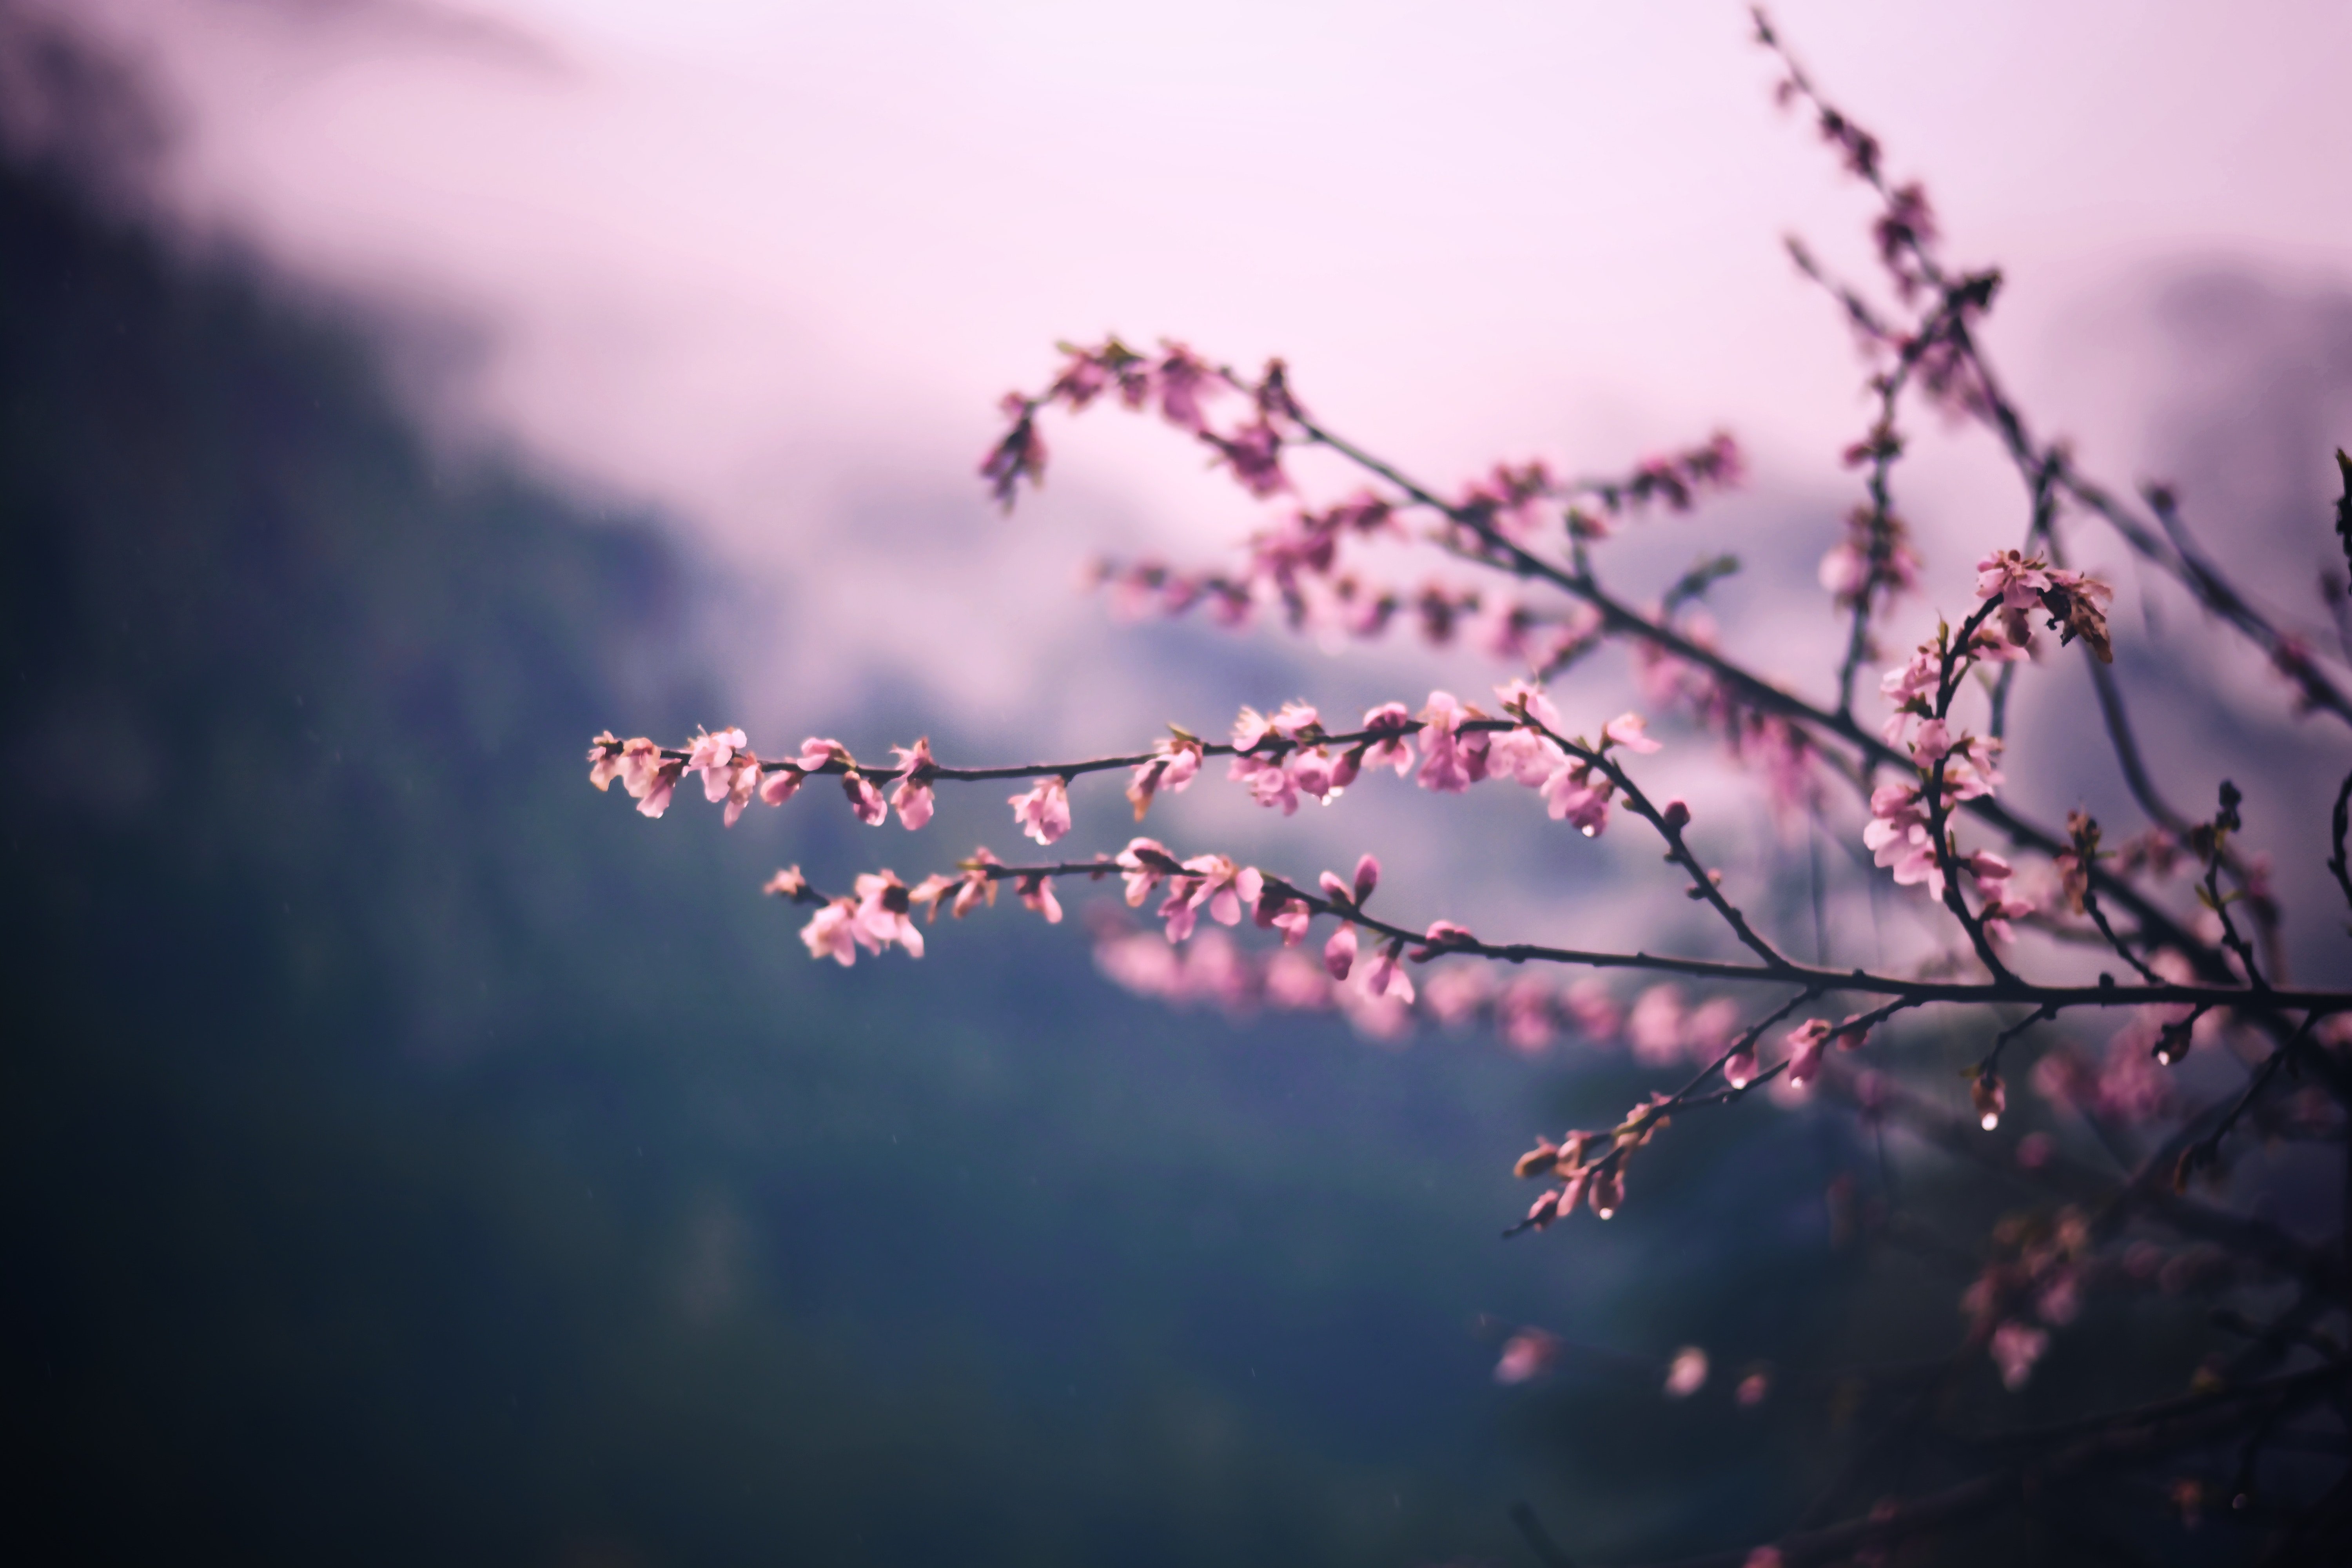 Cherry 4K wallpapers for your desktop or mobile screen free and easy to download